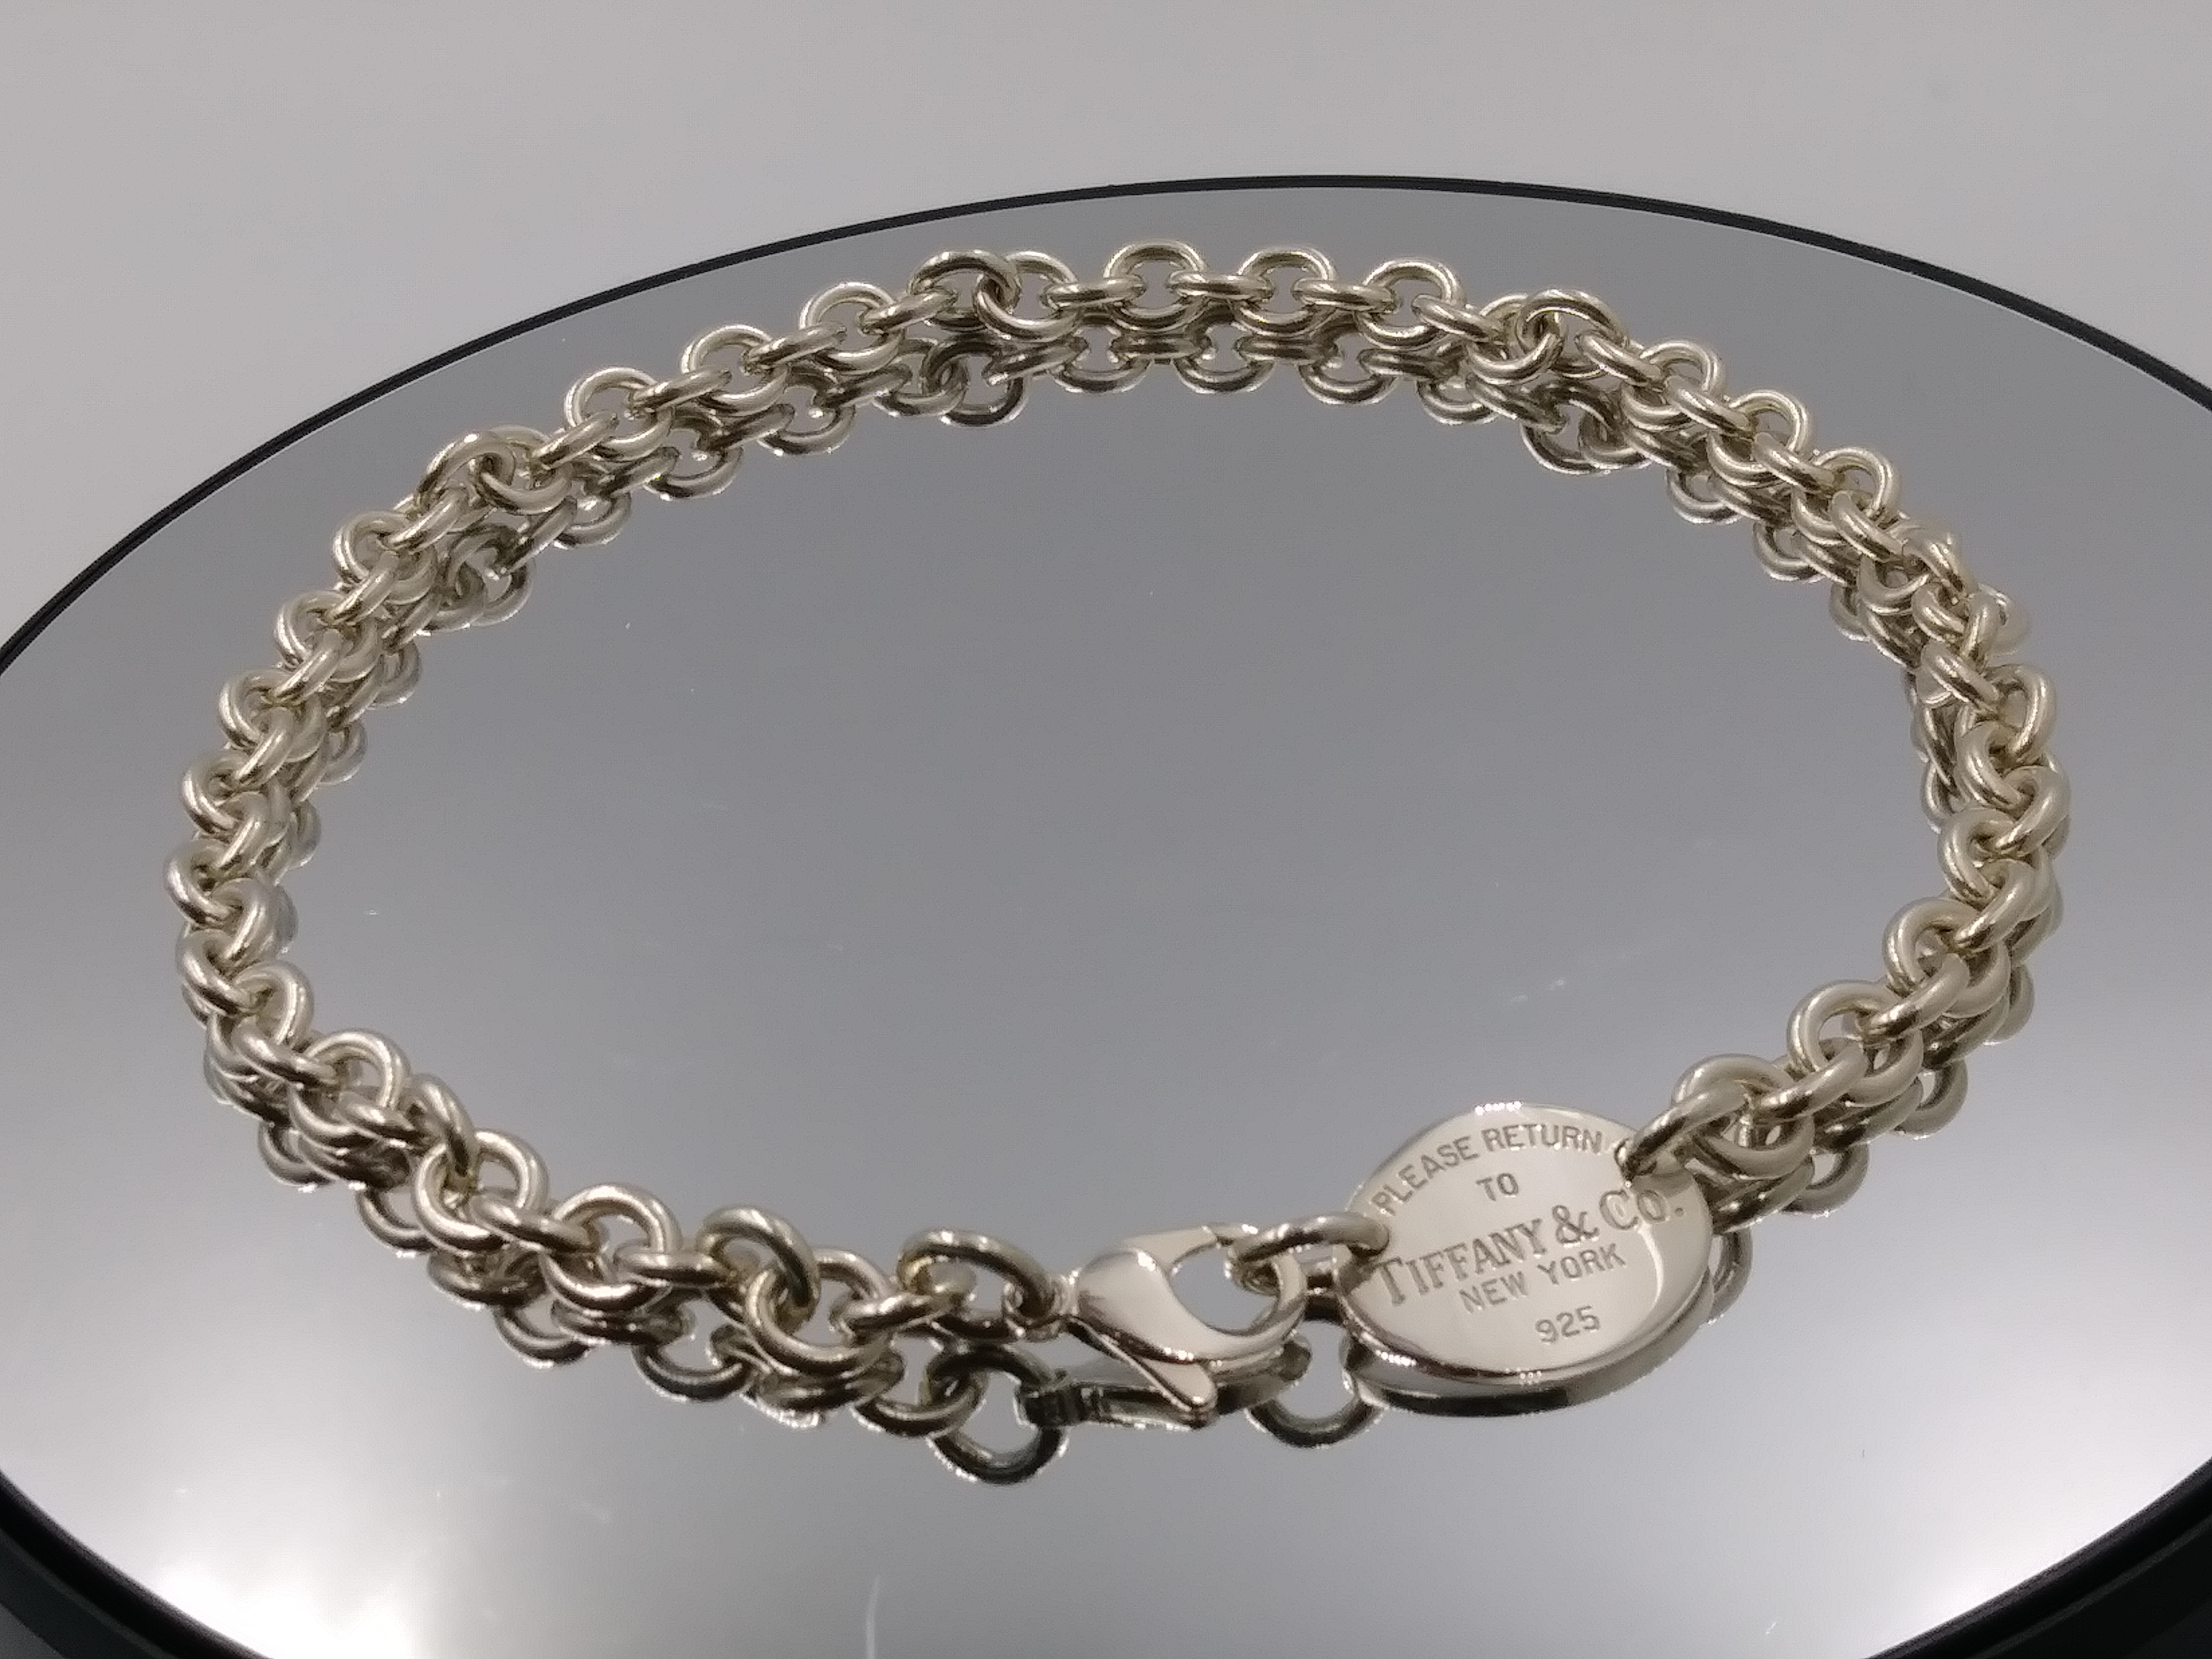 Tiffany & Co. - Please Return To Tiffany & Co Sterling Silver Oval